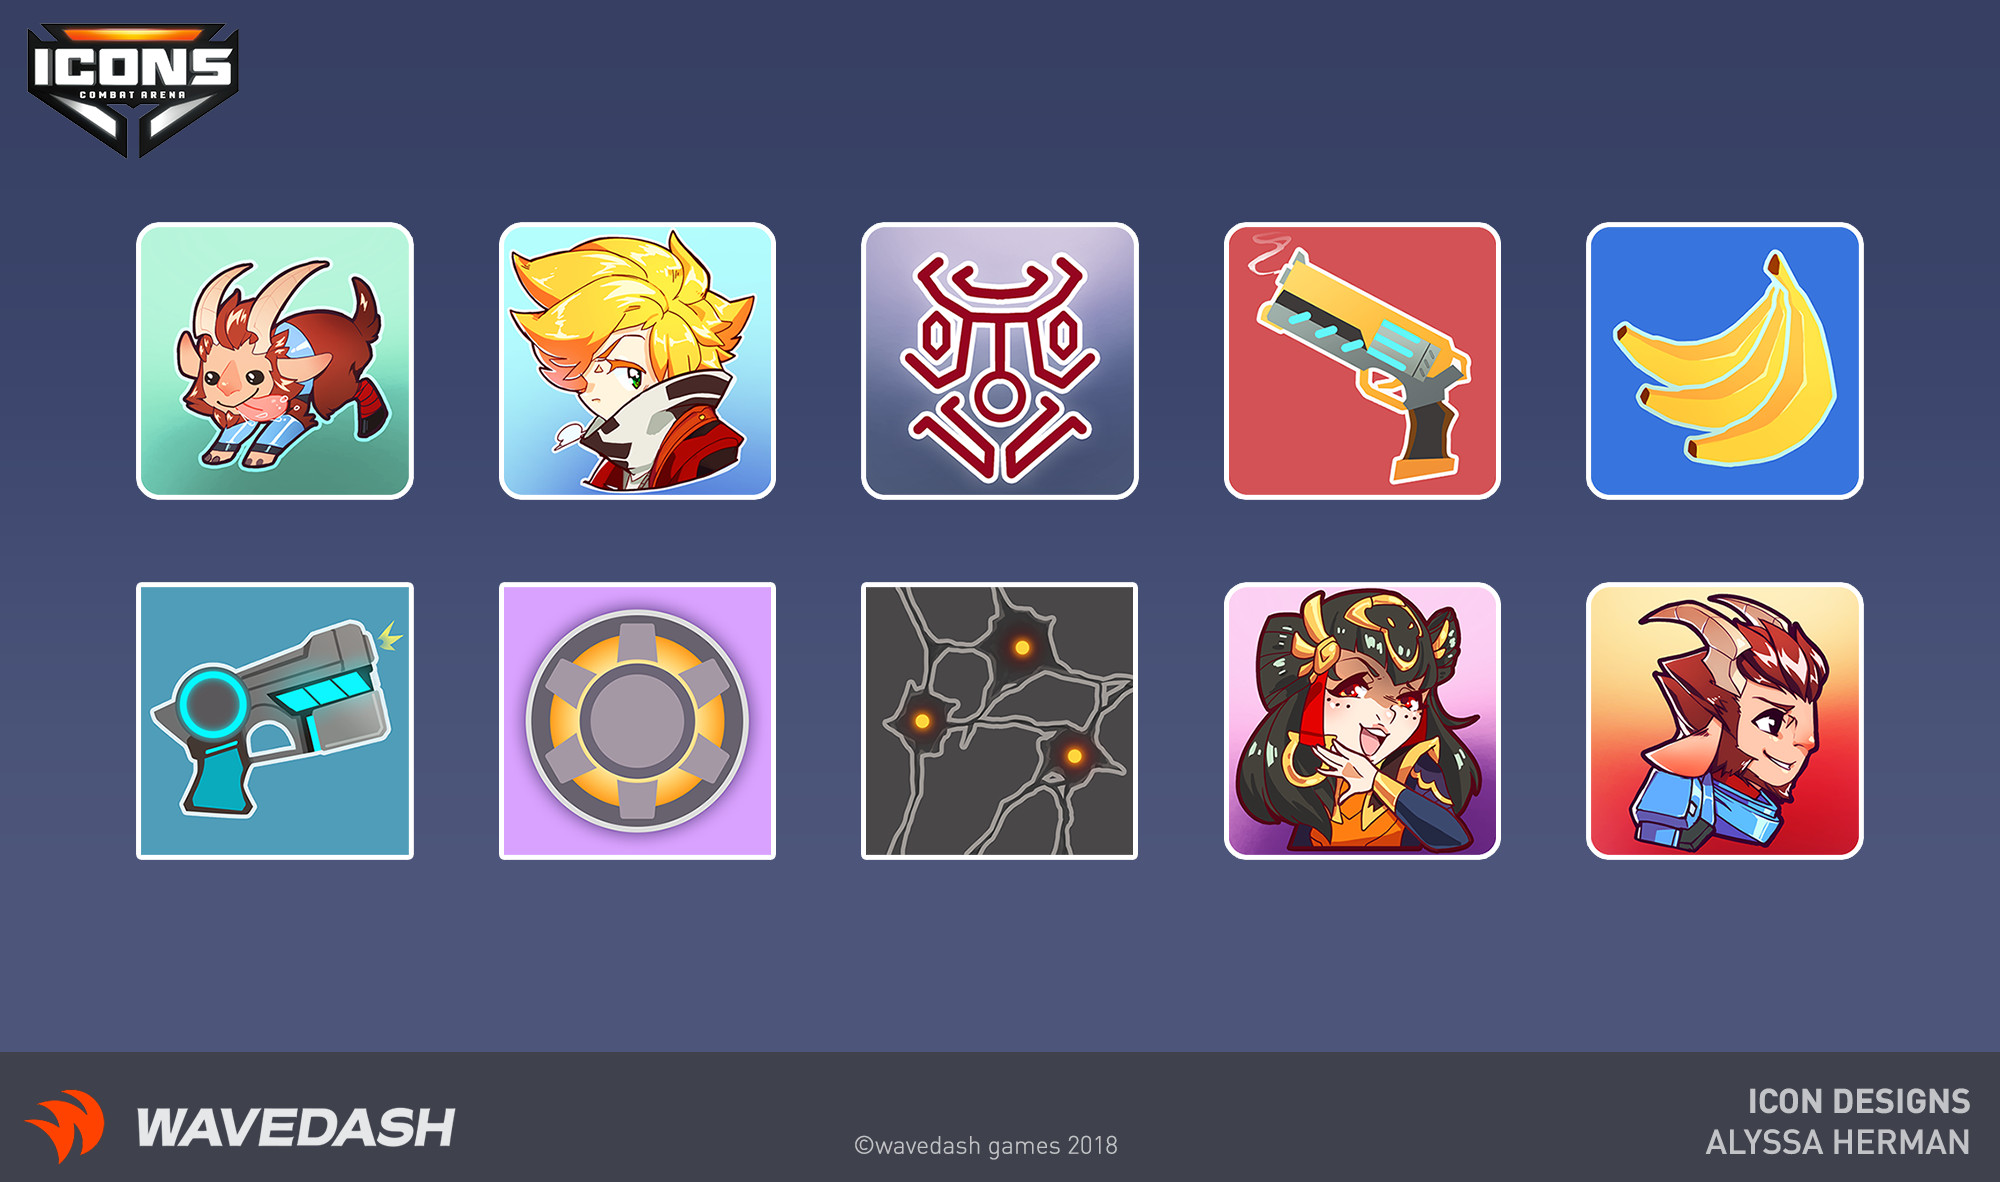 Player icons